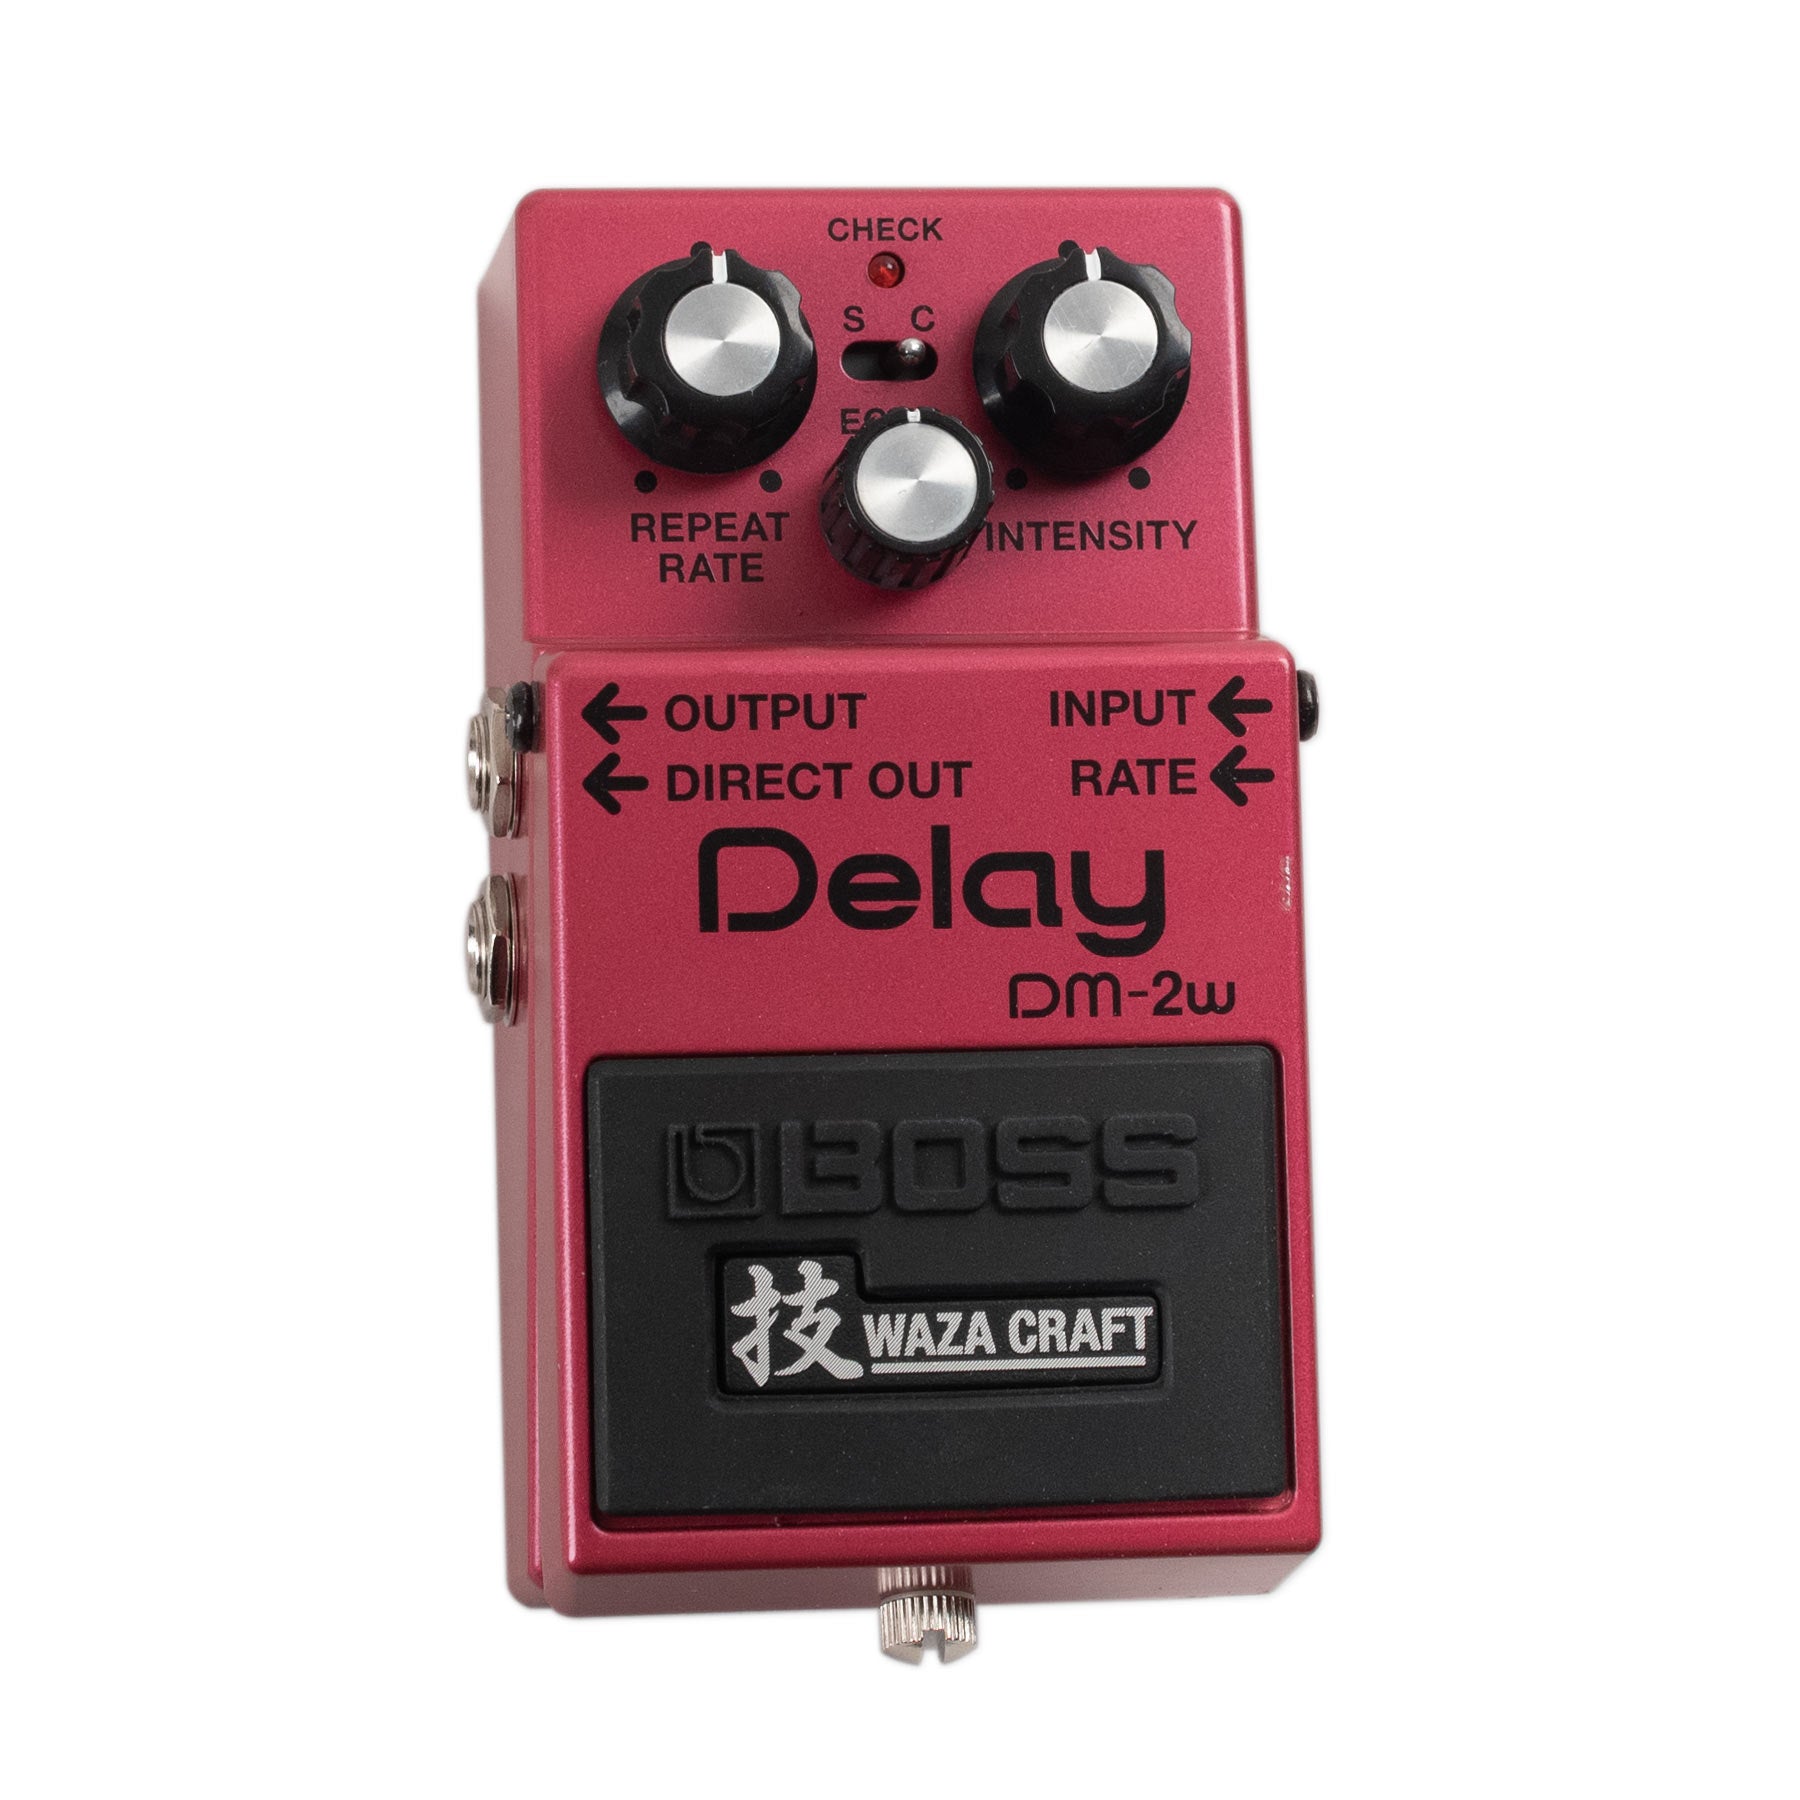 USED BOSS DM-2W ANALOG DELAY WITH BOX